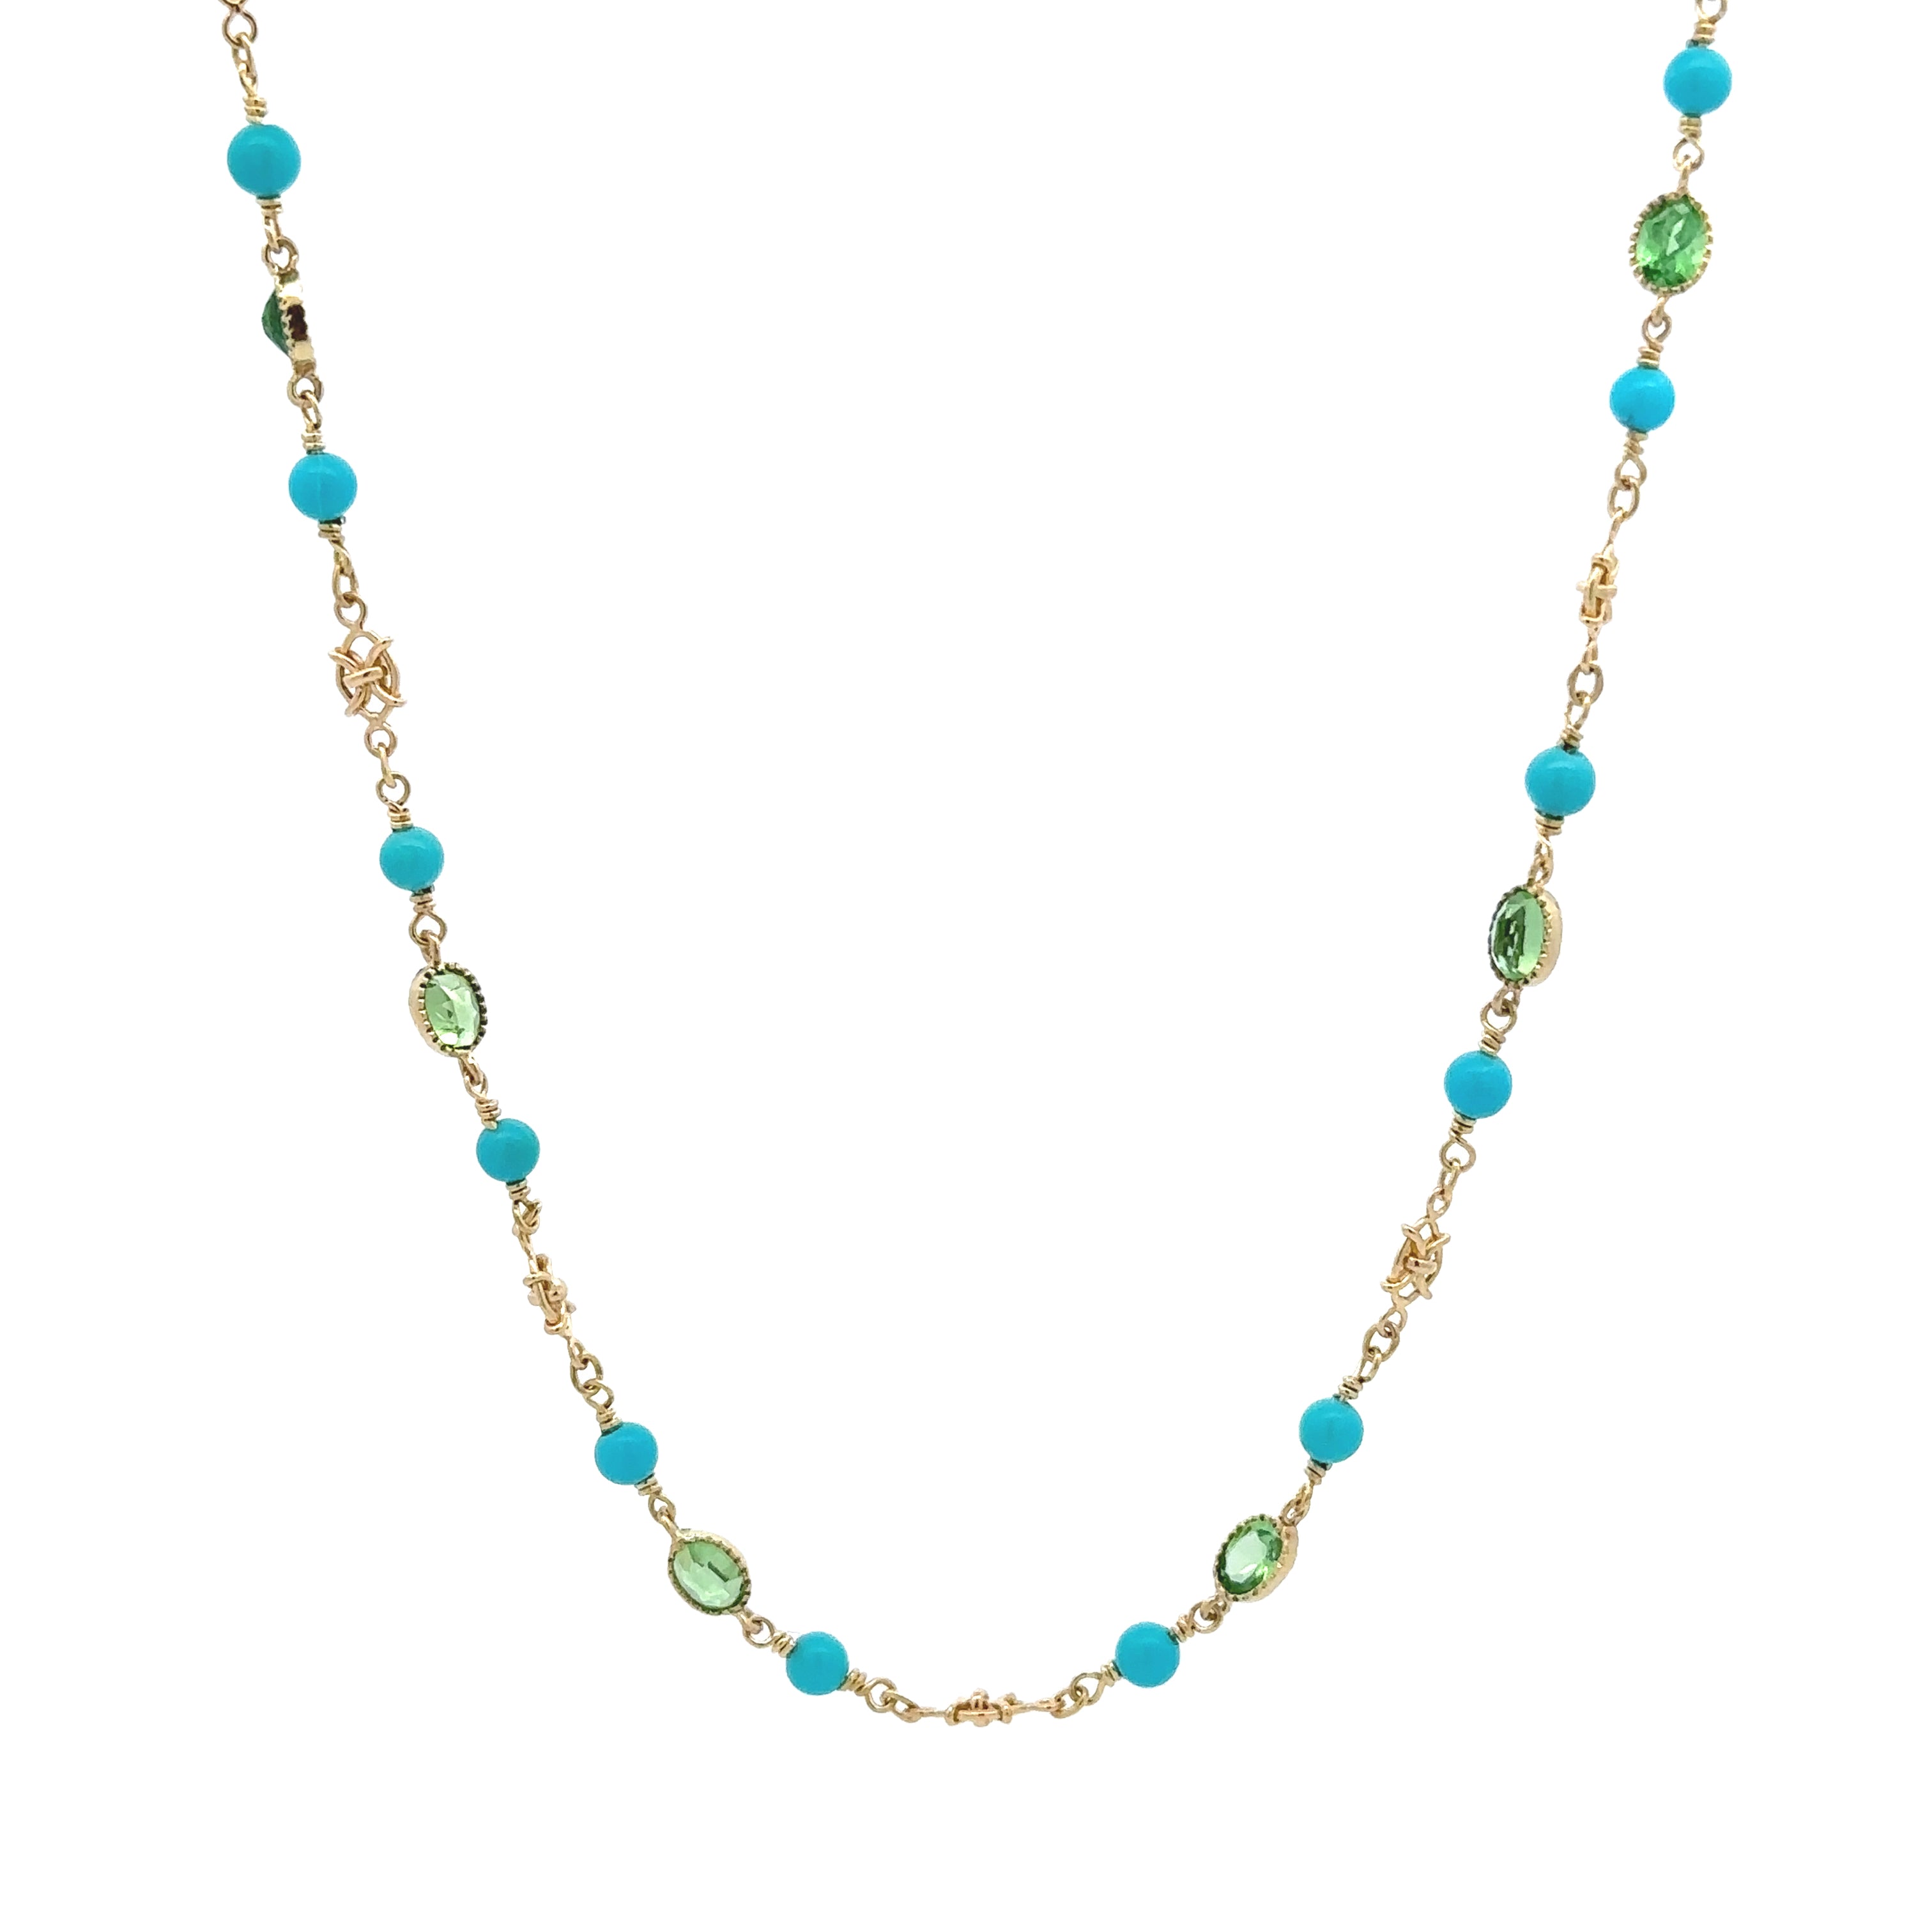 John Apel 38" Tsavorite and Turquoise Necklace - Be On Park